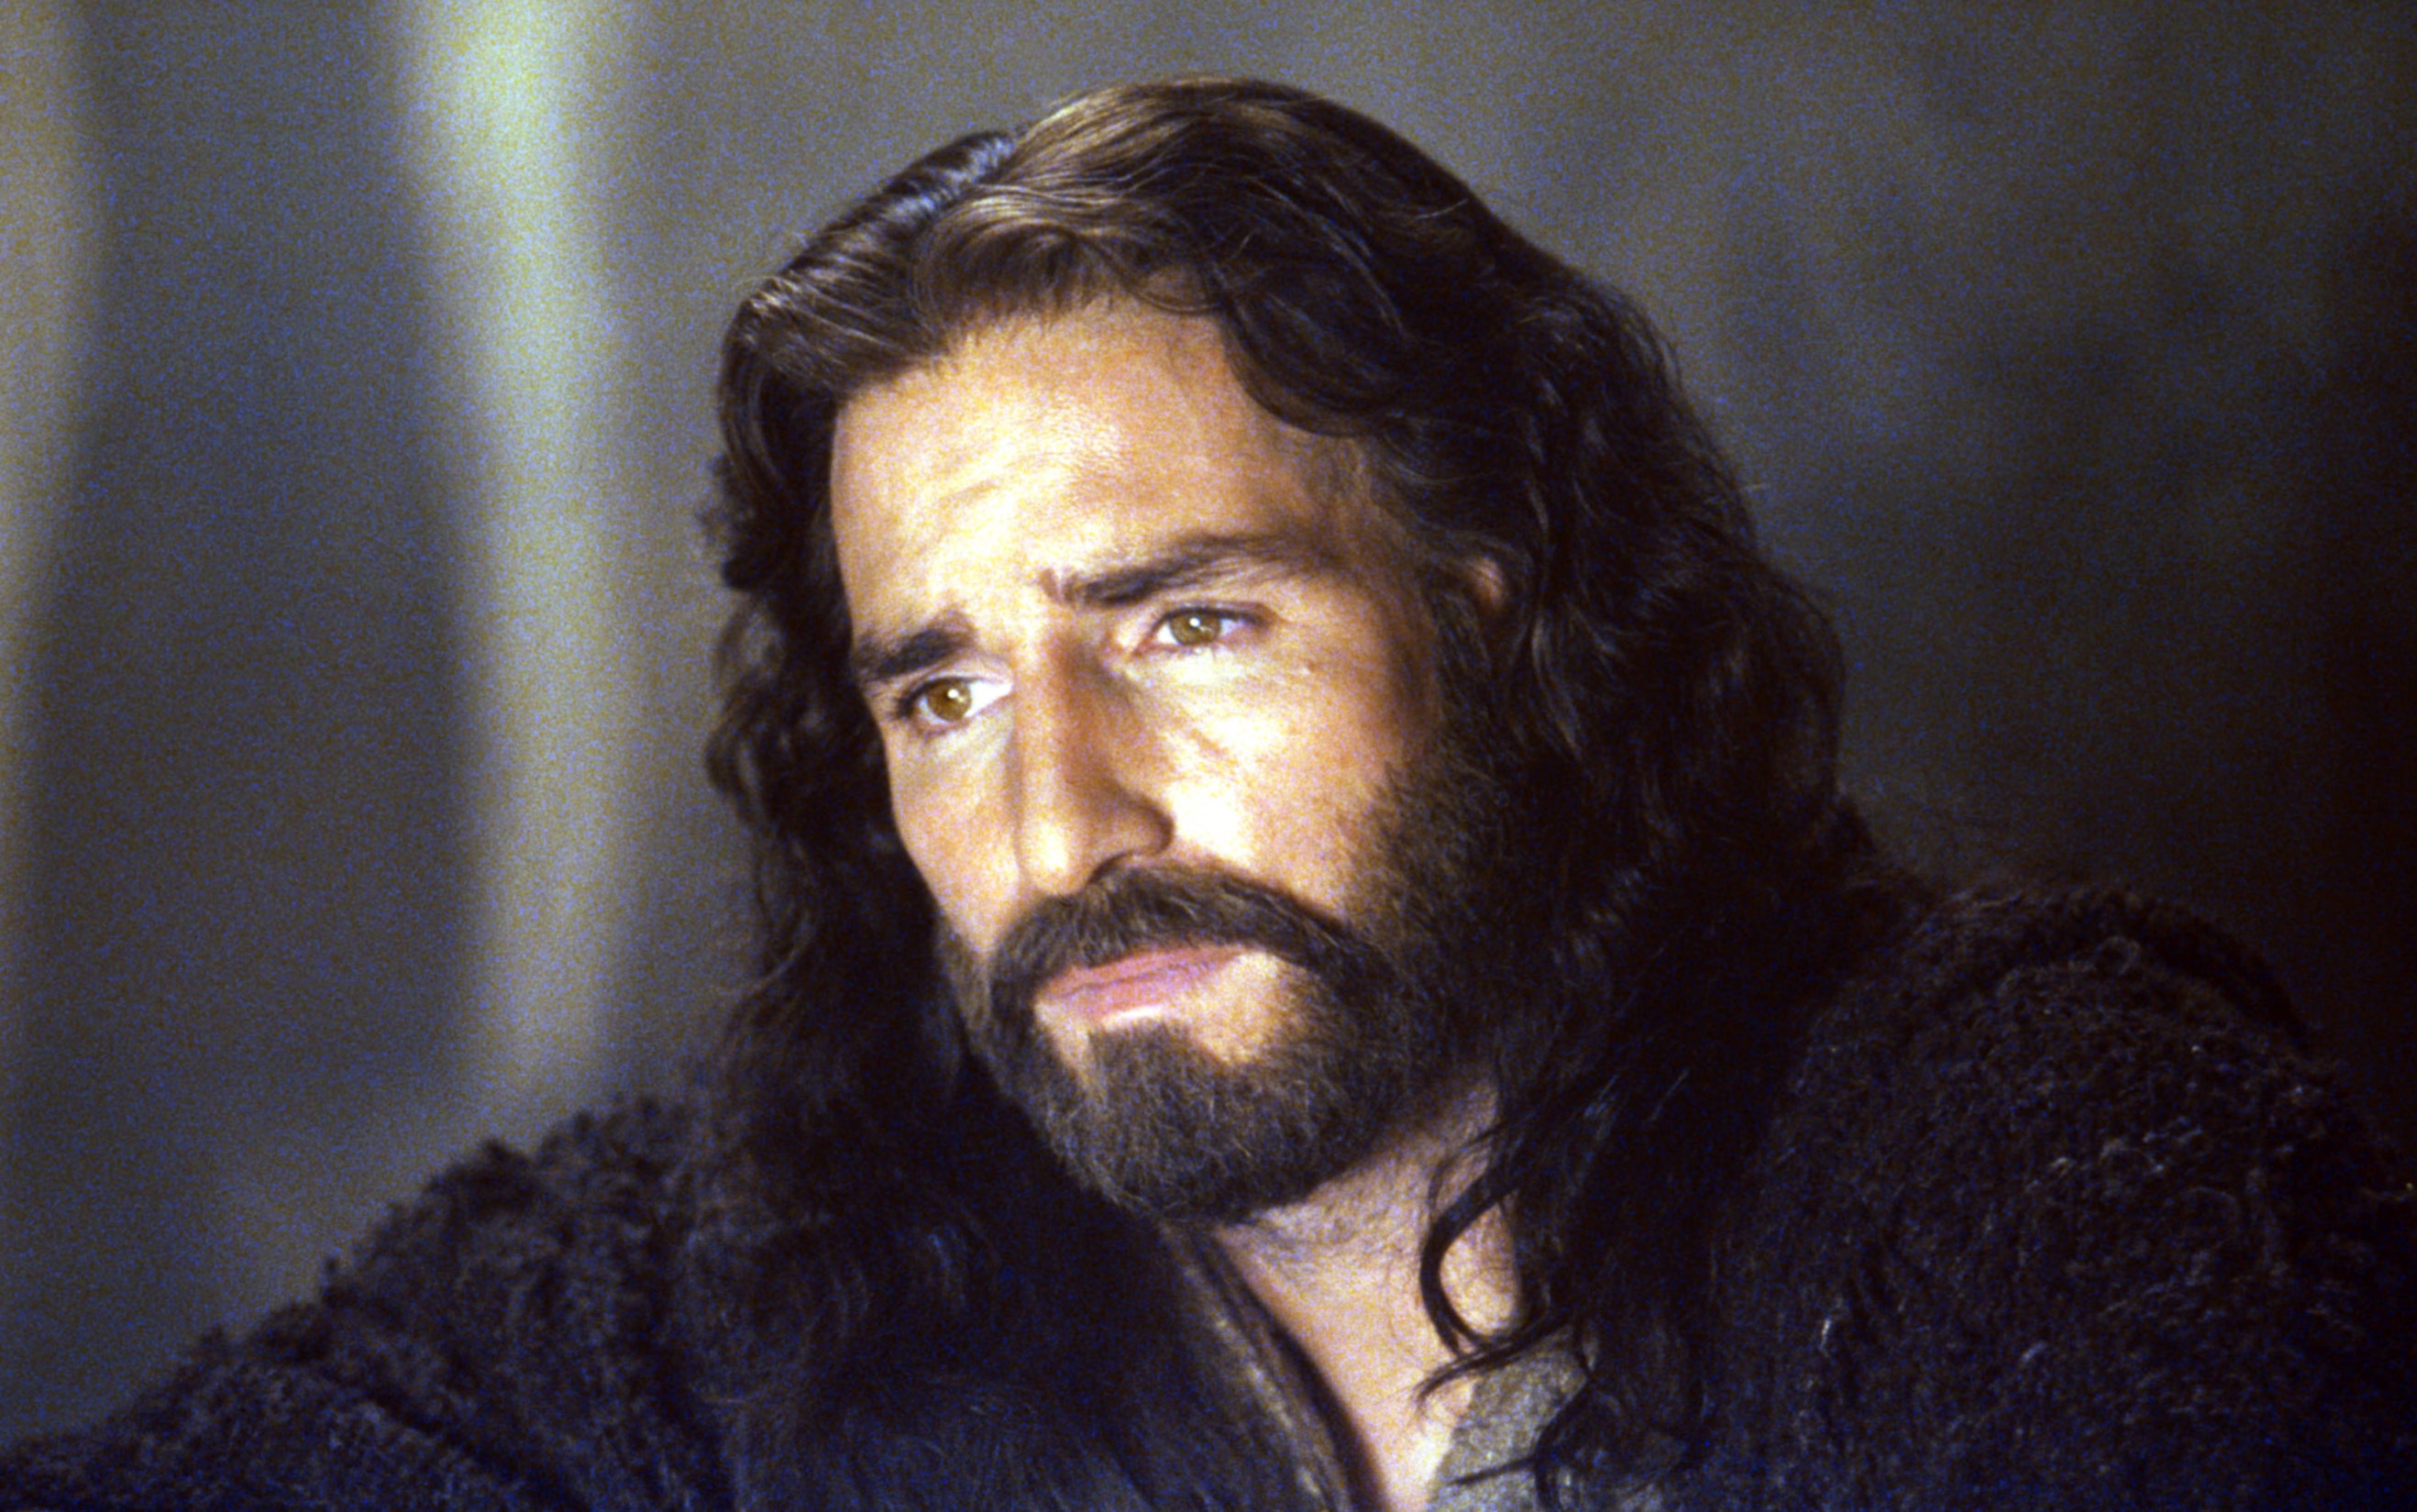 Screenshot from &quot;The Passion of the Christ&quot;